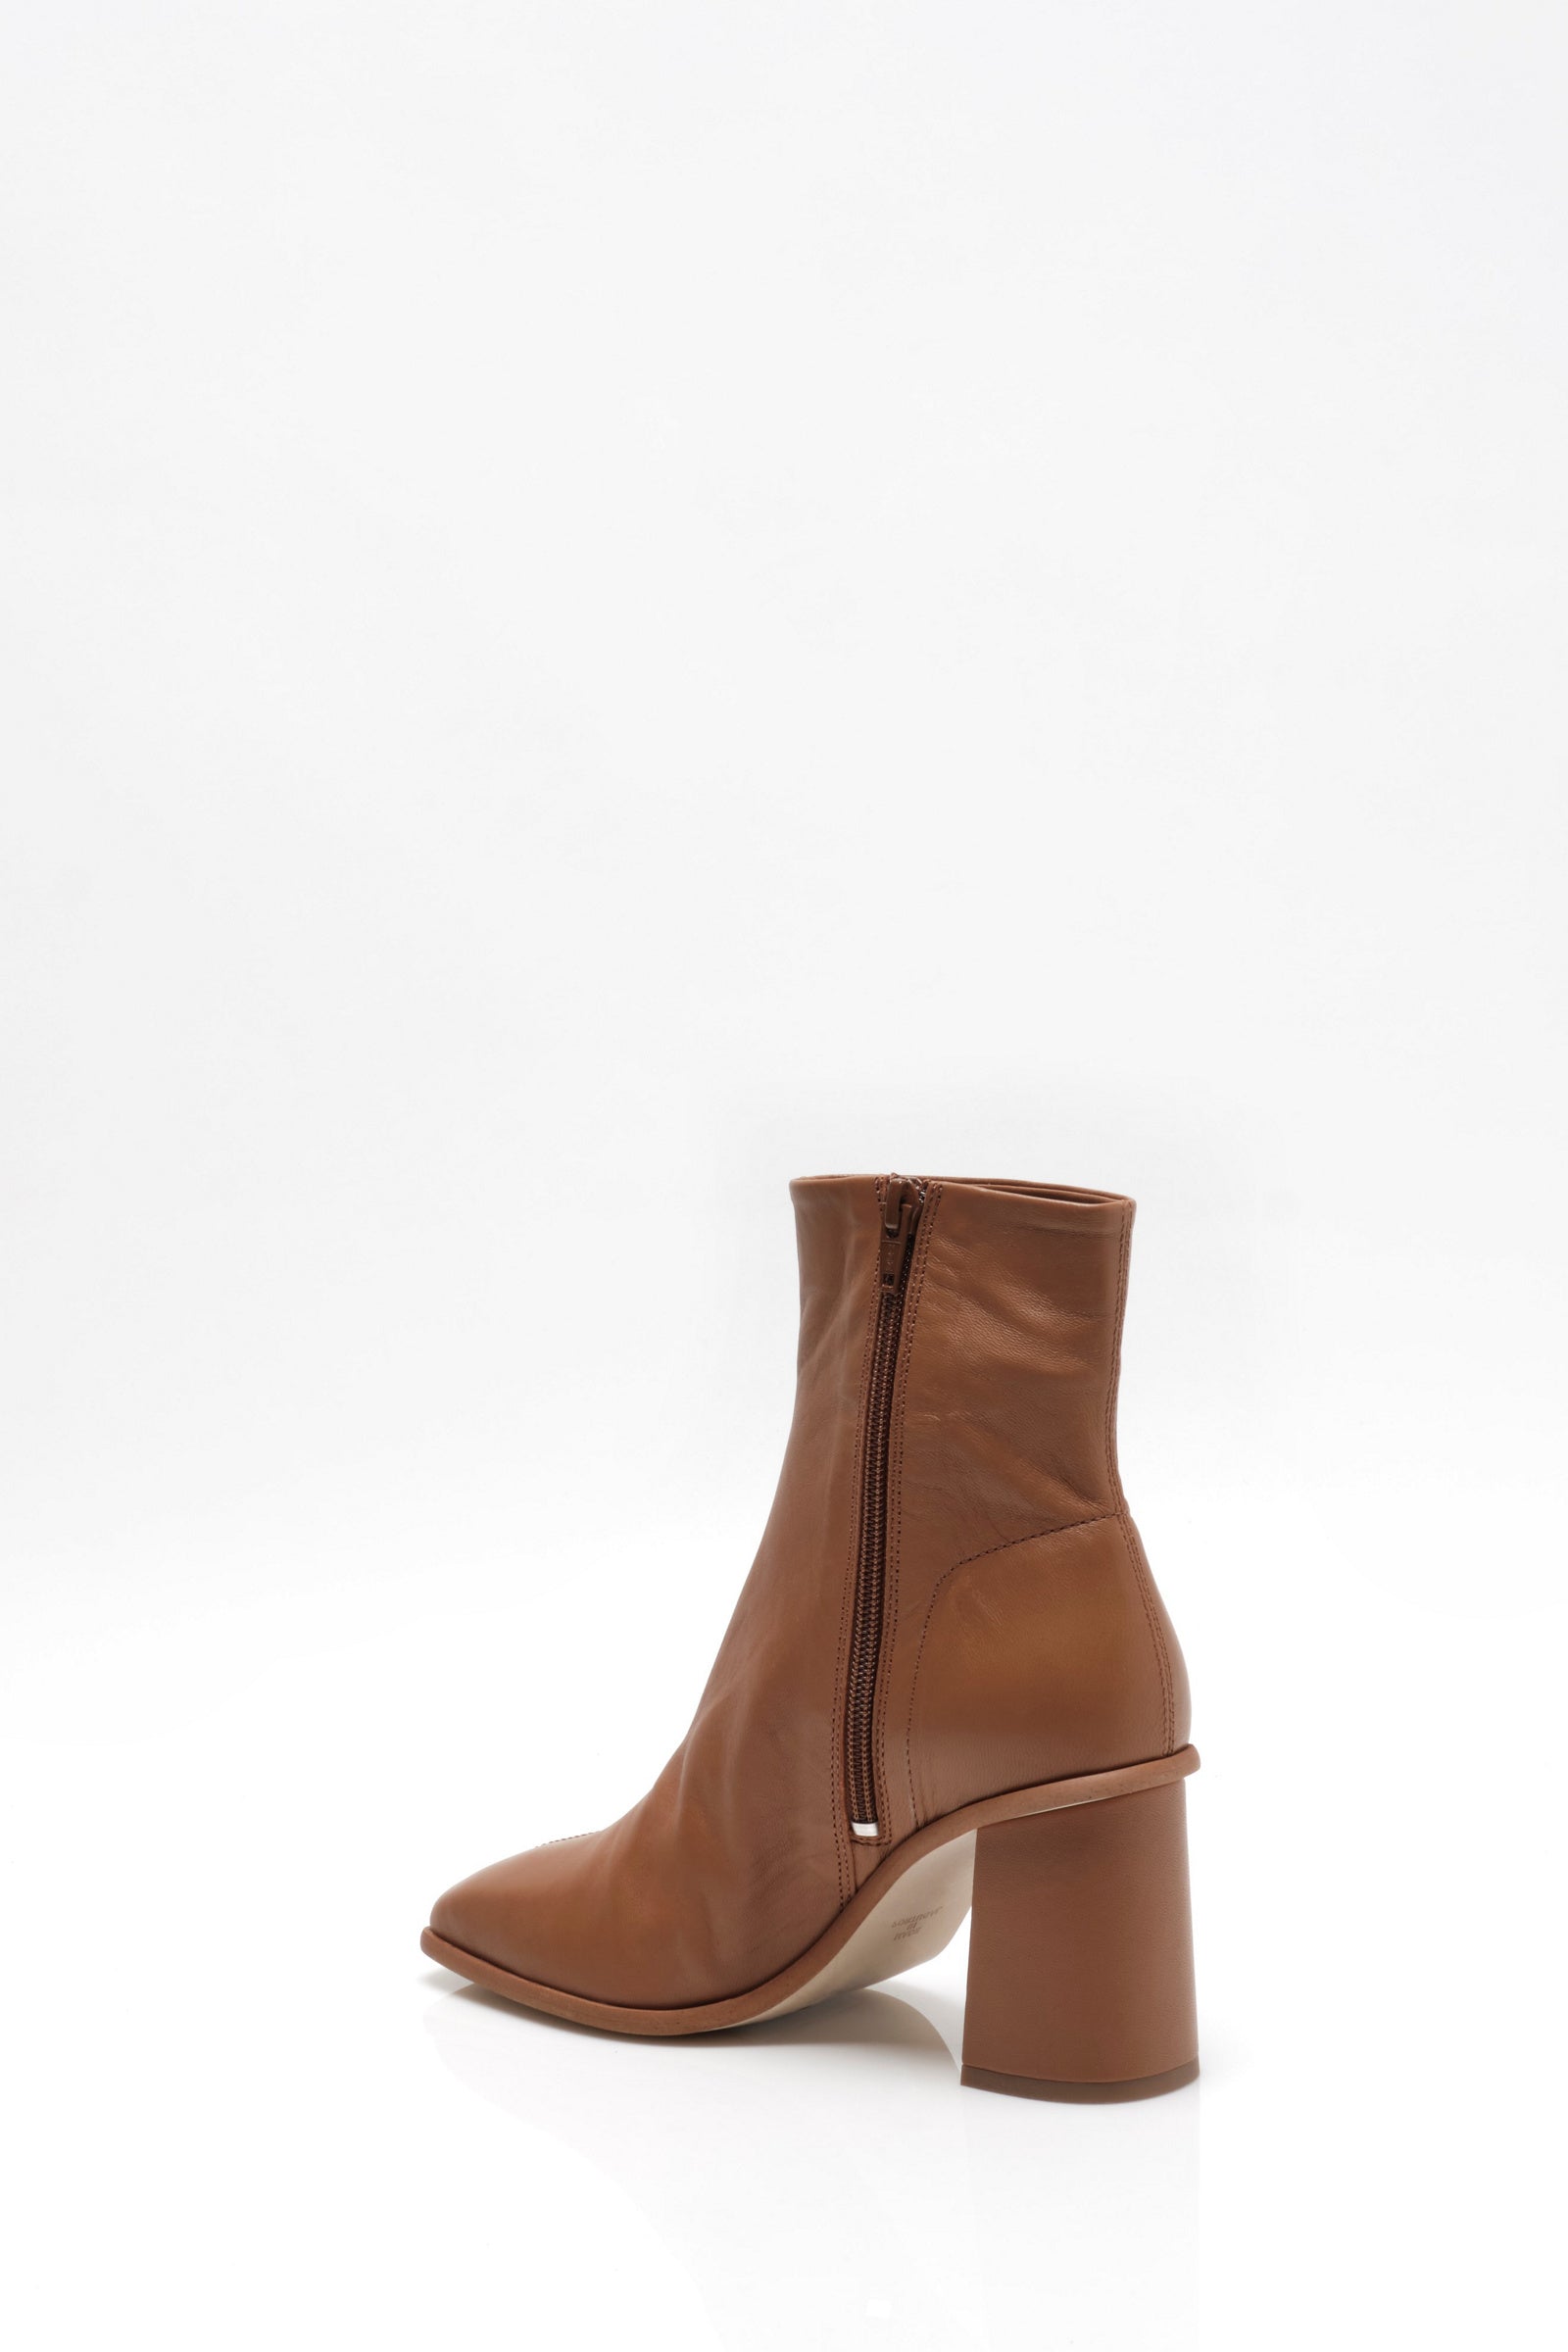 Sienna Ankle Boot in Cognac